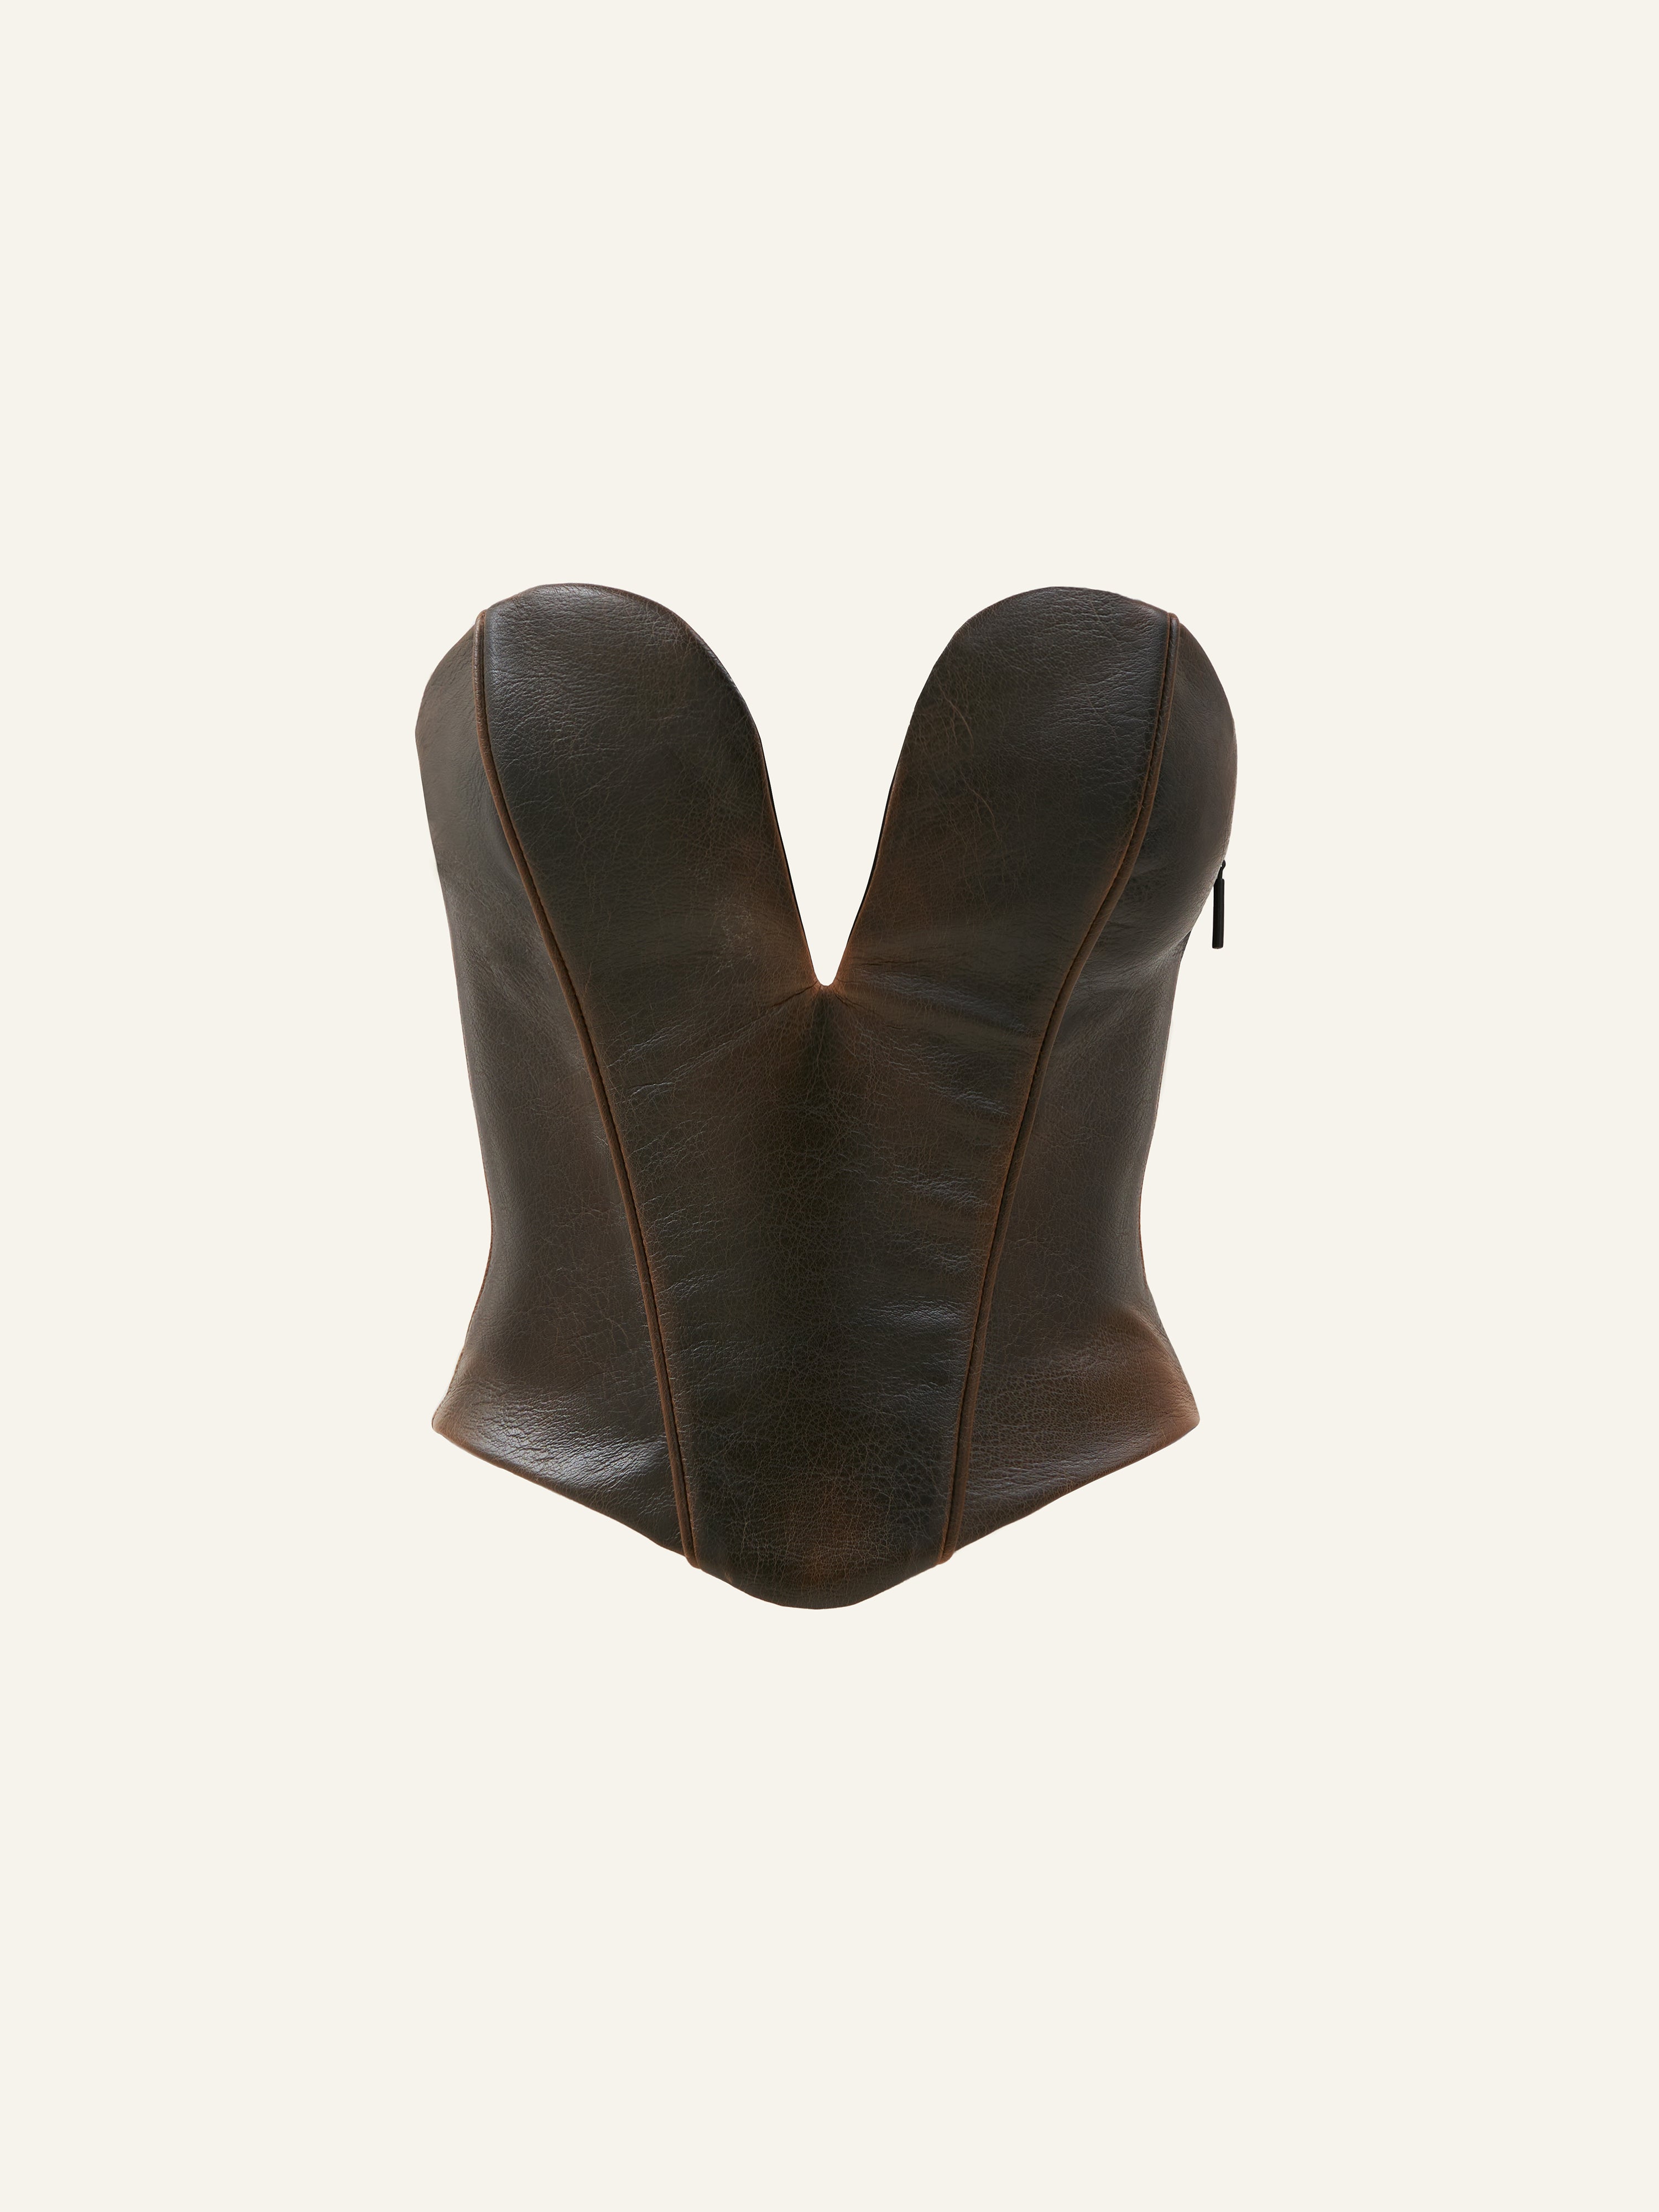 Product photo of a brown vegan leather tube top with deep v neck